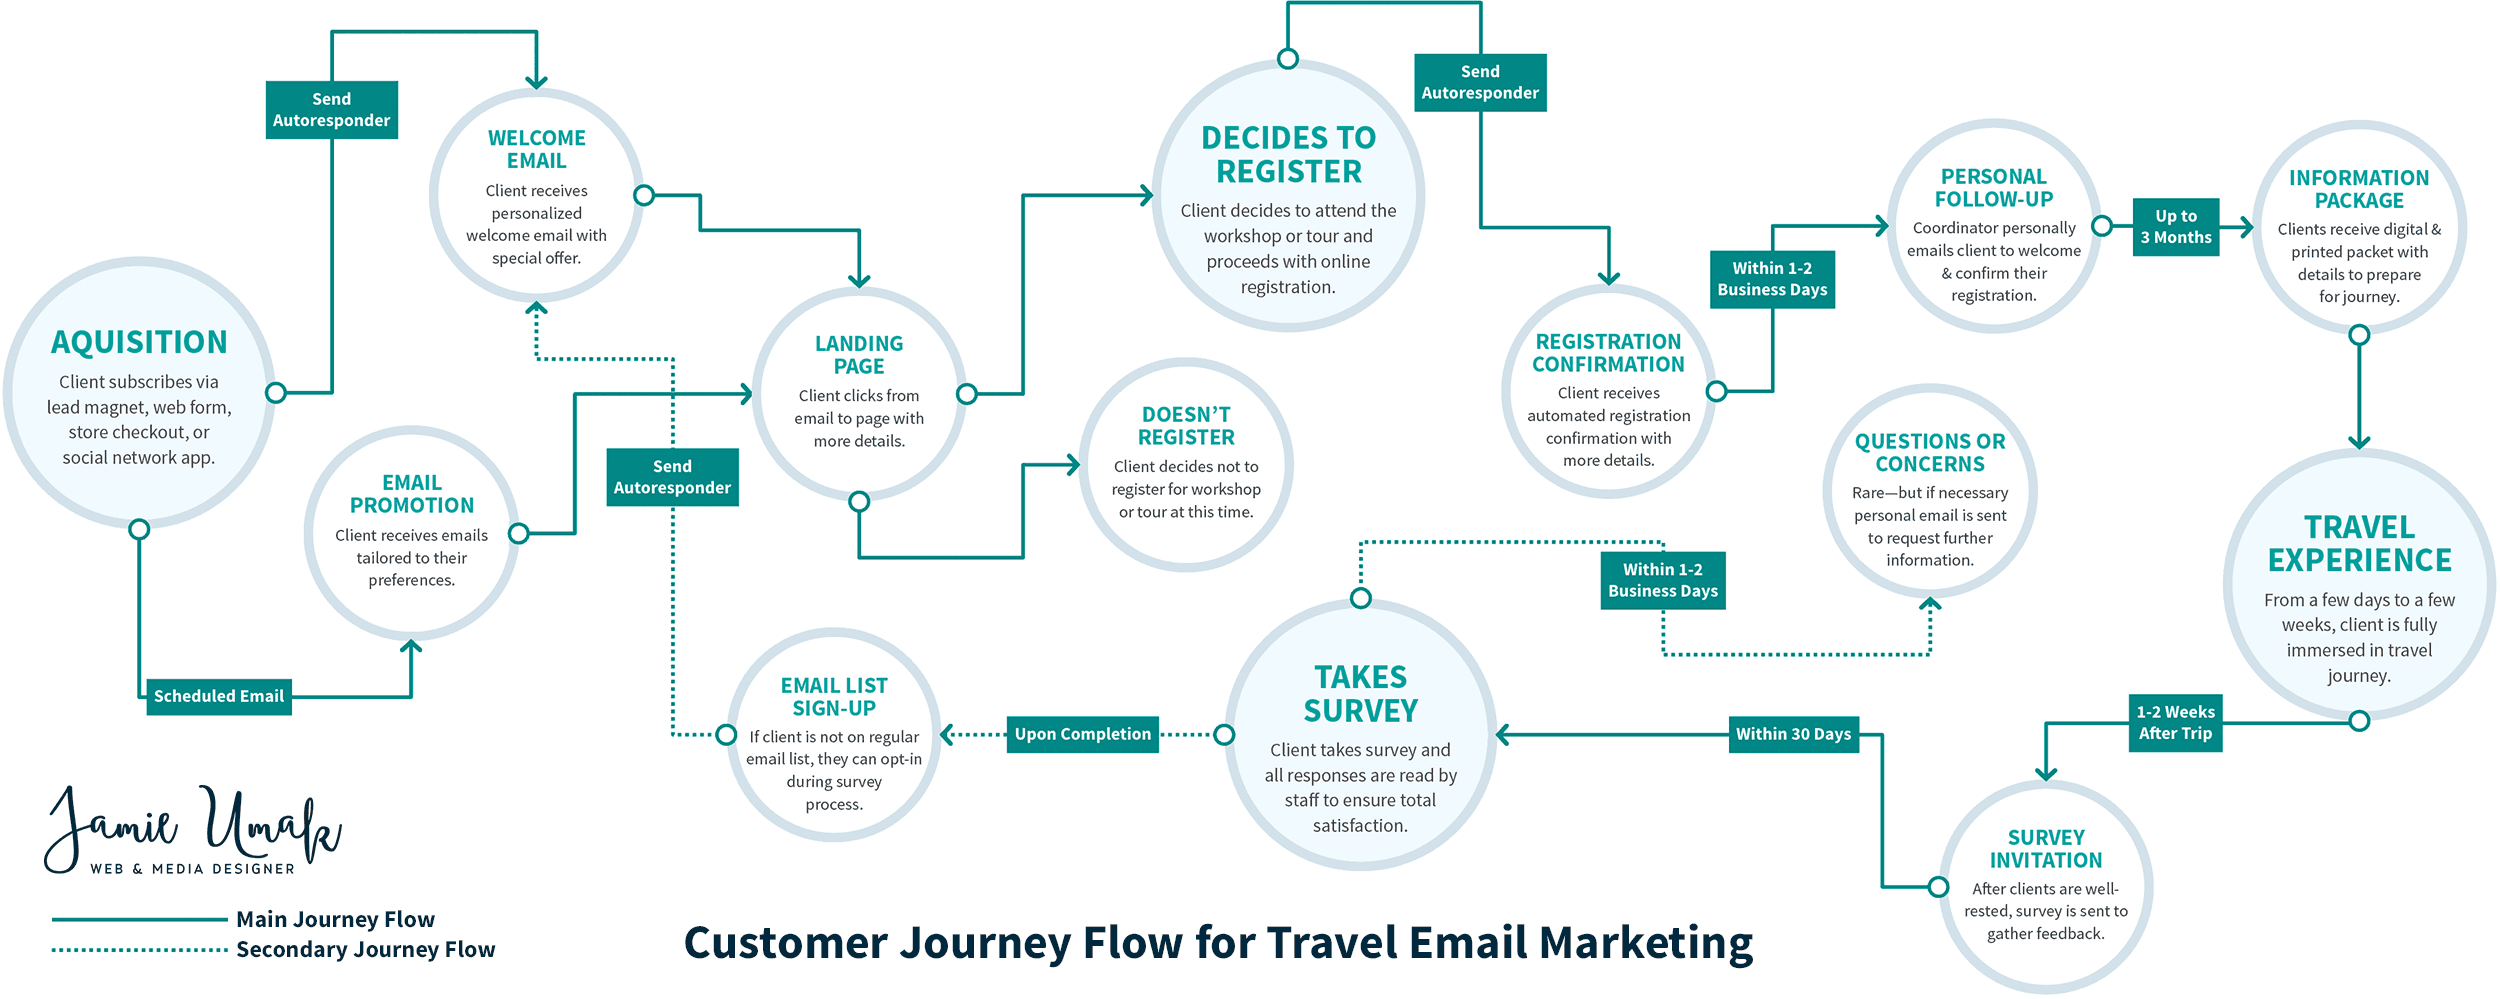 Chart: Customer Journey Flow for Travel Email Marketing